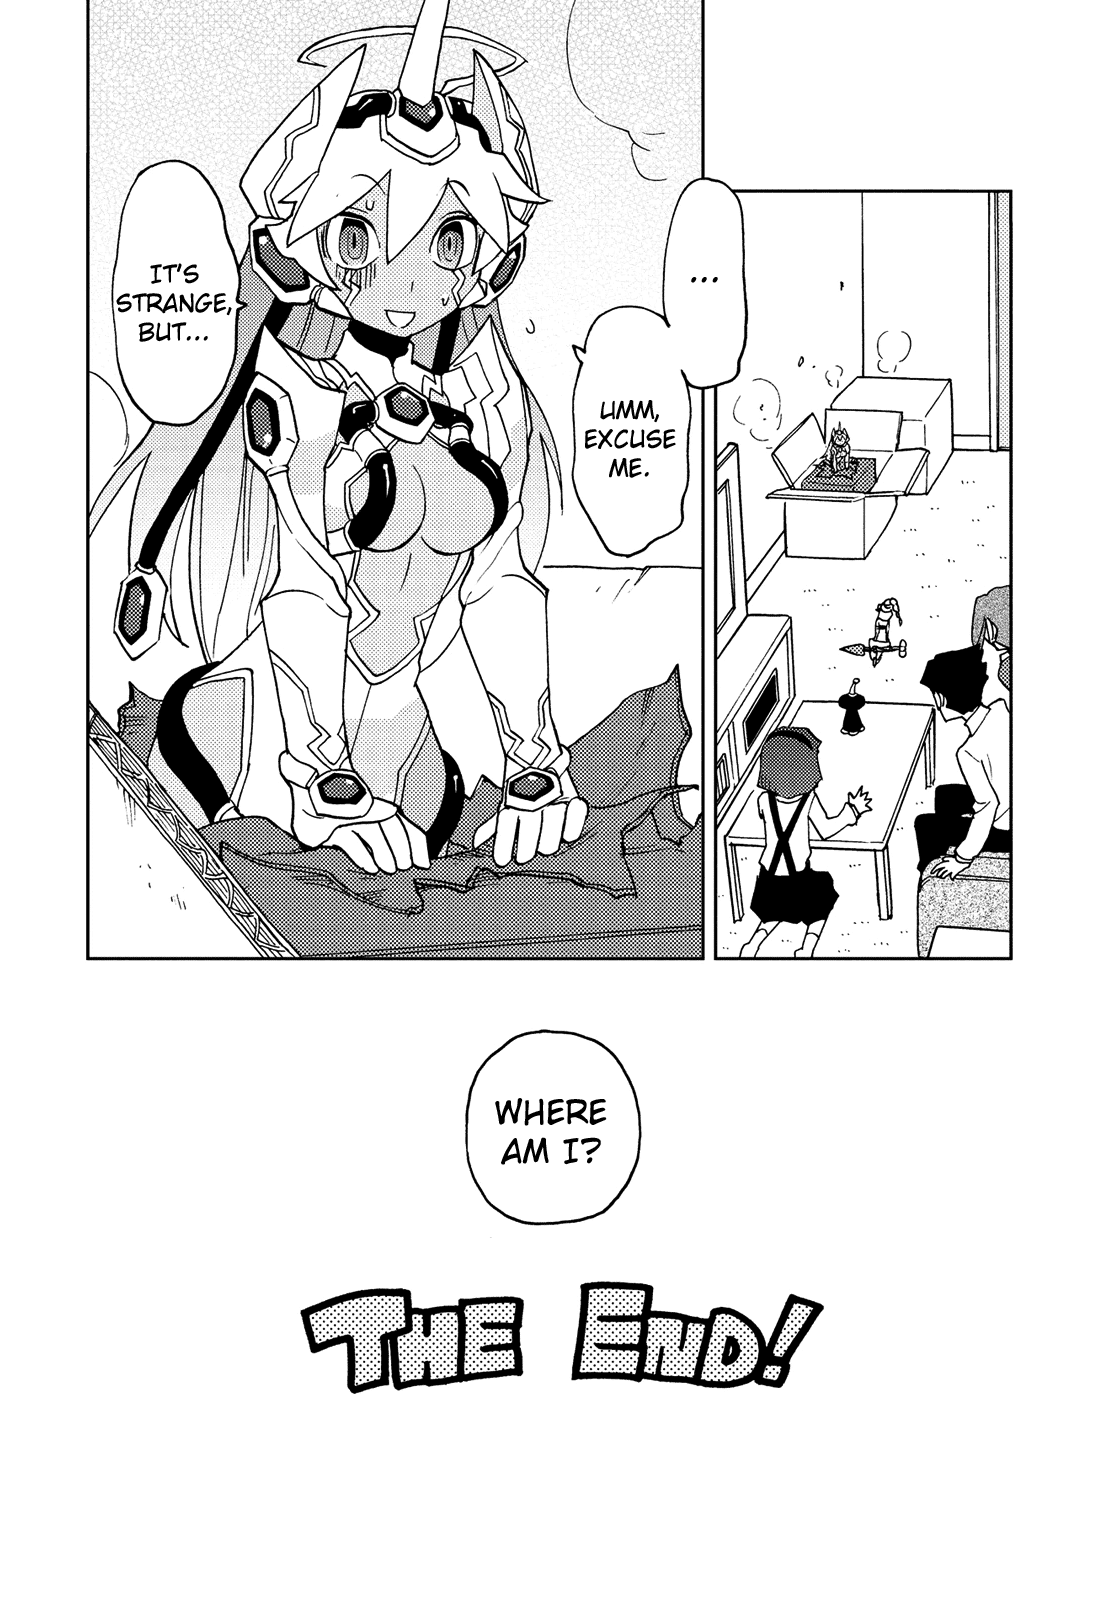 Choukadou Girl 1/6 Vol.4 Chapter 45: Show Me Your Universe